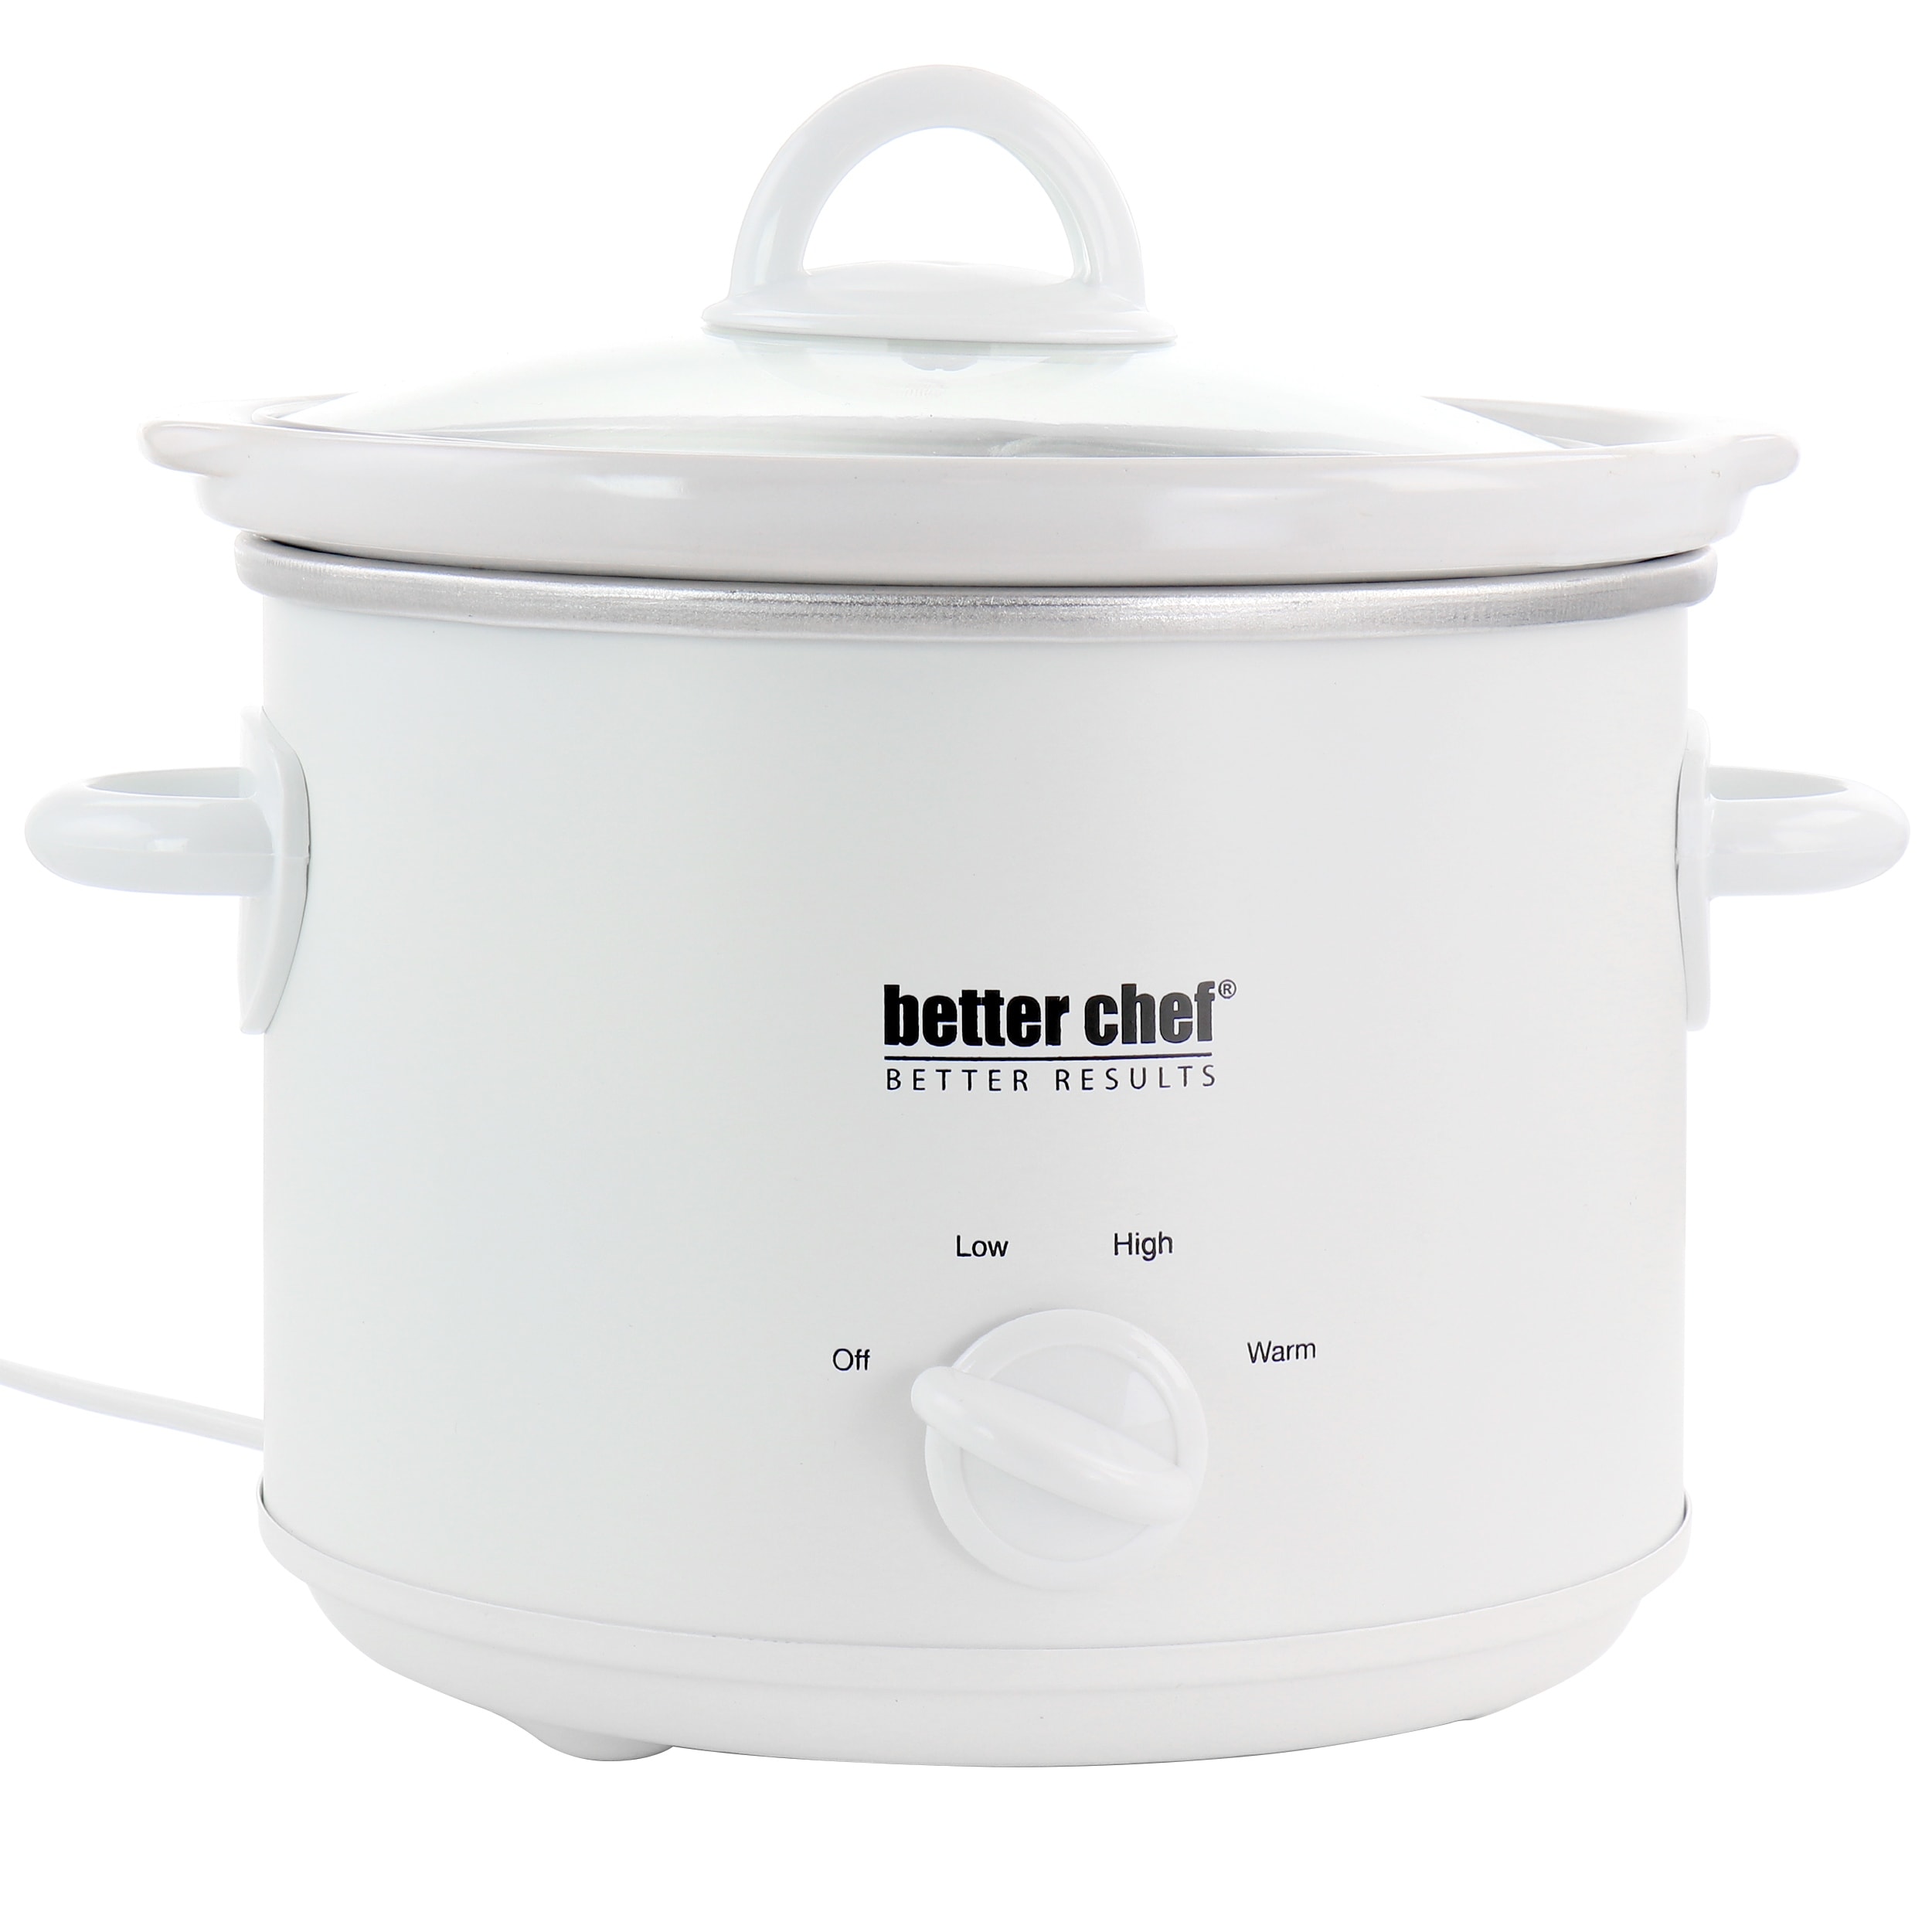 https://ak1.ostkcdn.com/images/products/is/images/direct/8c88ebb68ce4f22718ab35fc1e272661b98acfa7/Better-Chef-3-Quart-Round-Slow-Cooker-with-Removable-Stoneware-Crock.jpg